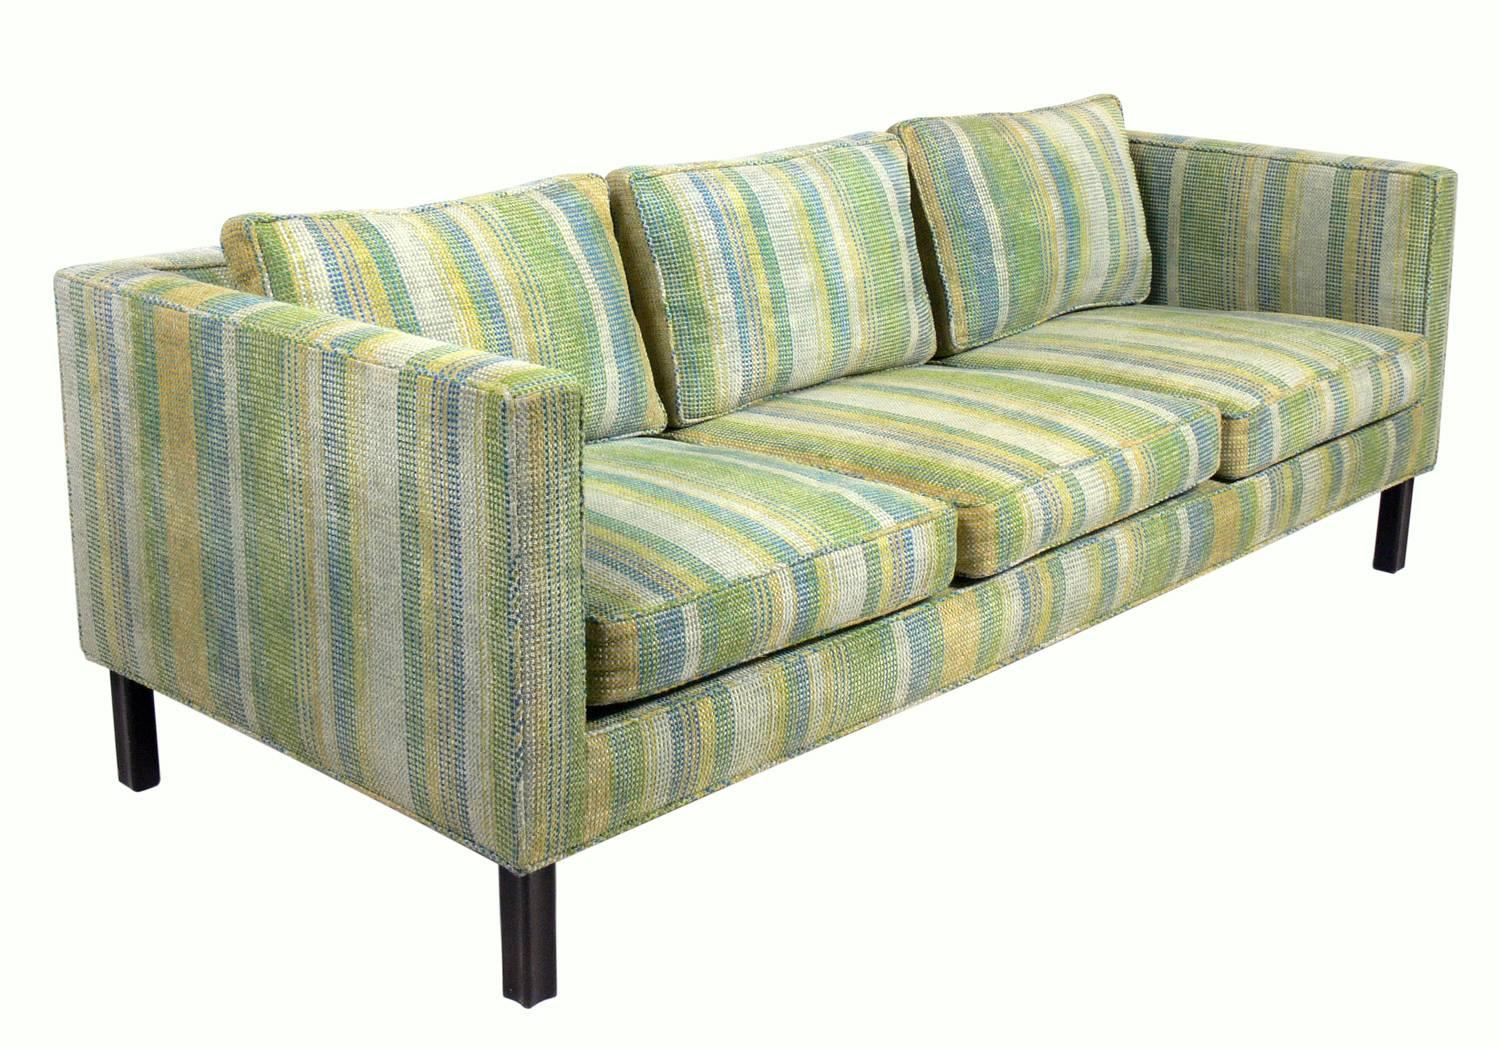 Clean lined sofa, designed by Edward Wormley for Dunbar, American, circa 1960s. It currently retains the original Dunbar upholstery, which is in basically clean usable condition. If you would prefer it reupholstered, we can reupholster it in your